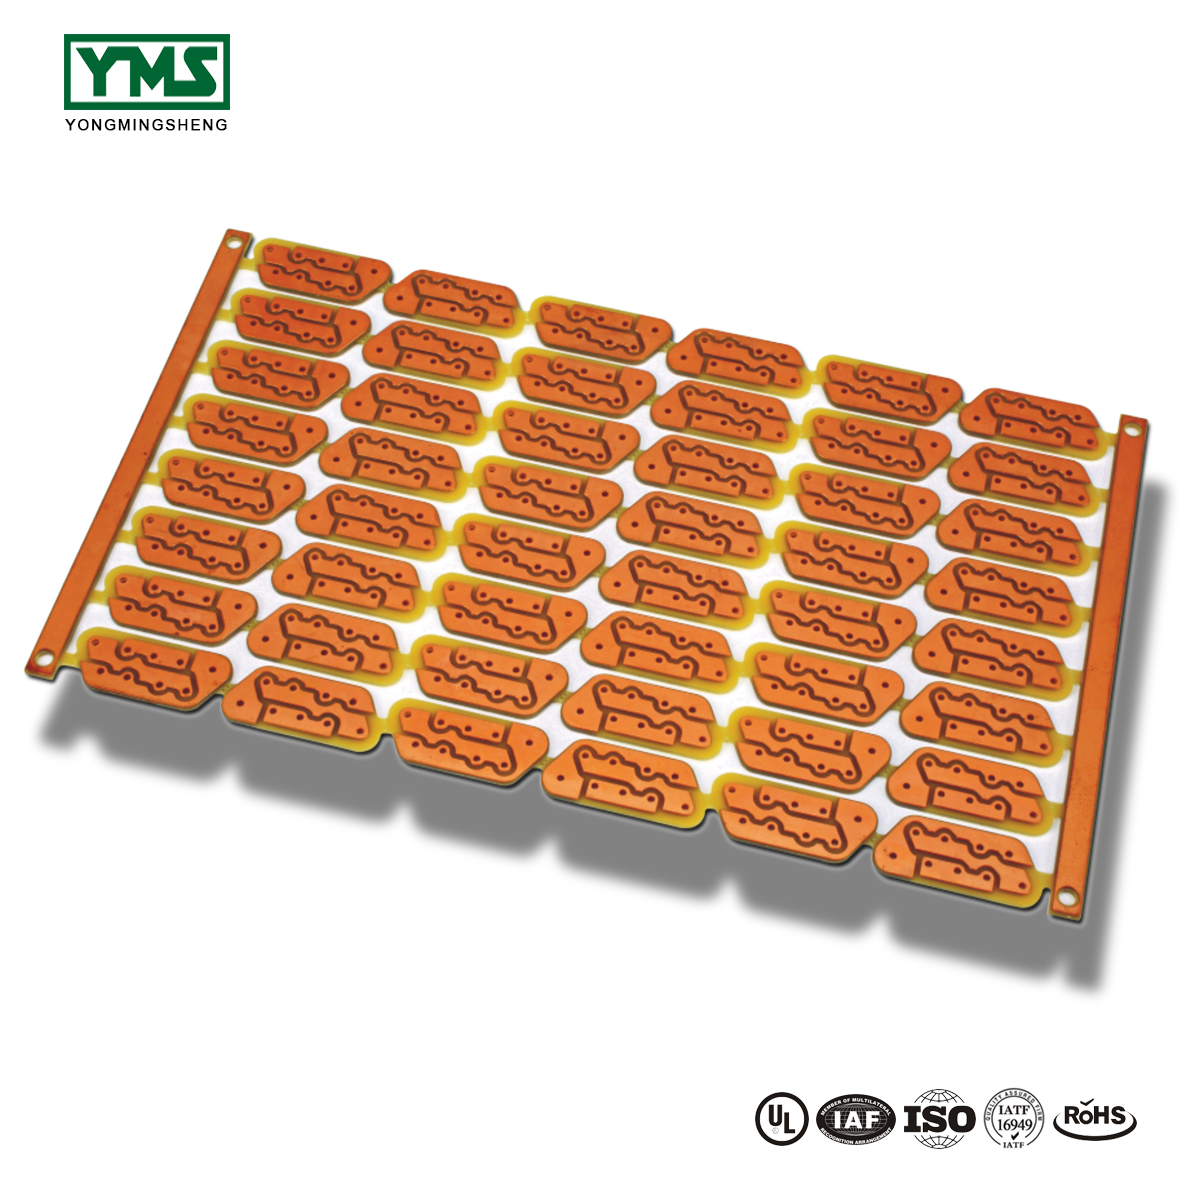 China Supplier Impedance Control Pcb - Reliable Supplier 50u Hard Gold Plated Computer Laptop Printed Circuit Board – Yongmingsheng